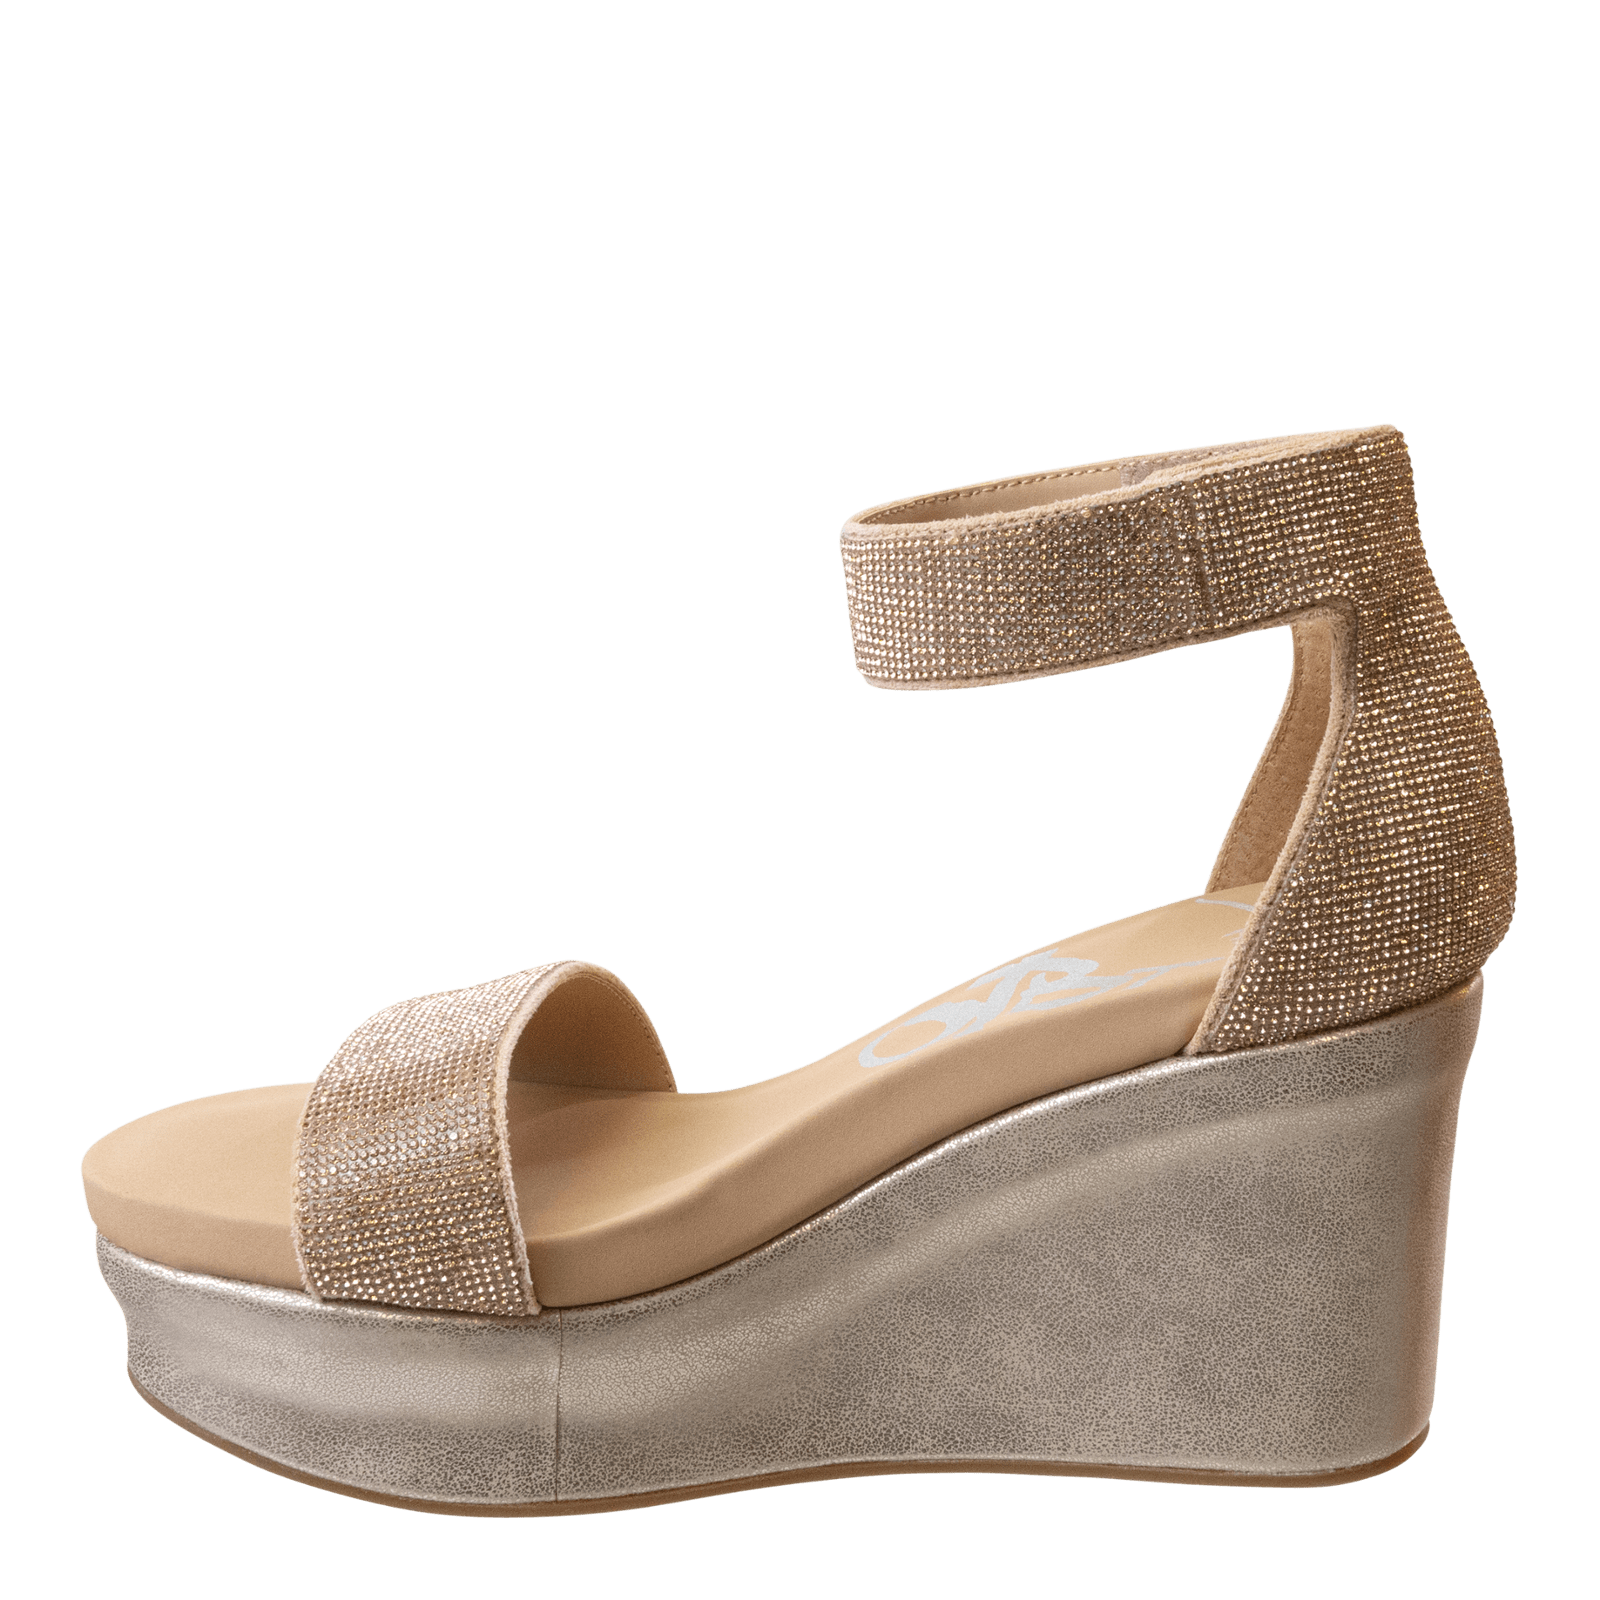 STATUS in ROSE GOLD Wedge Sandals